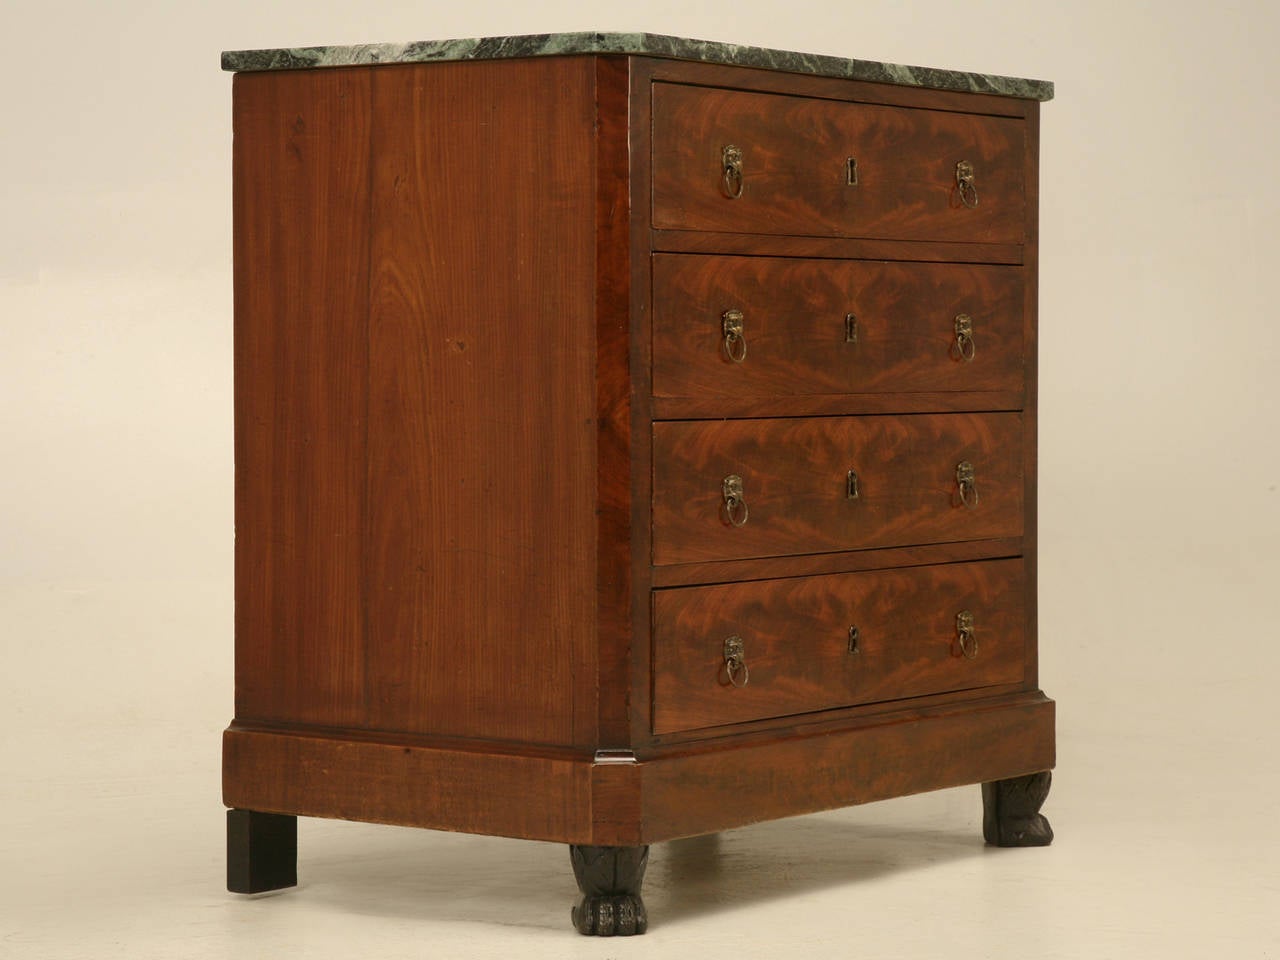 Petite antique French commode, or if you prefer chest of drawers that is wonderfully scaled and small enough to be used as a nightstand, or in an entry- hall. Either way, the scale makes it work almost anywhere and who doesn’t love the hand carved